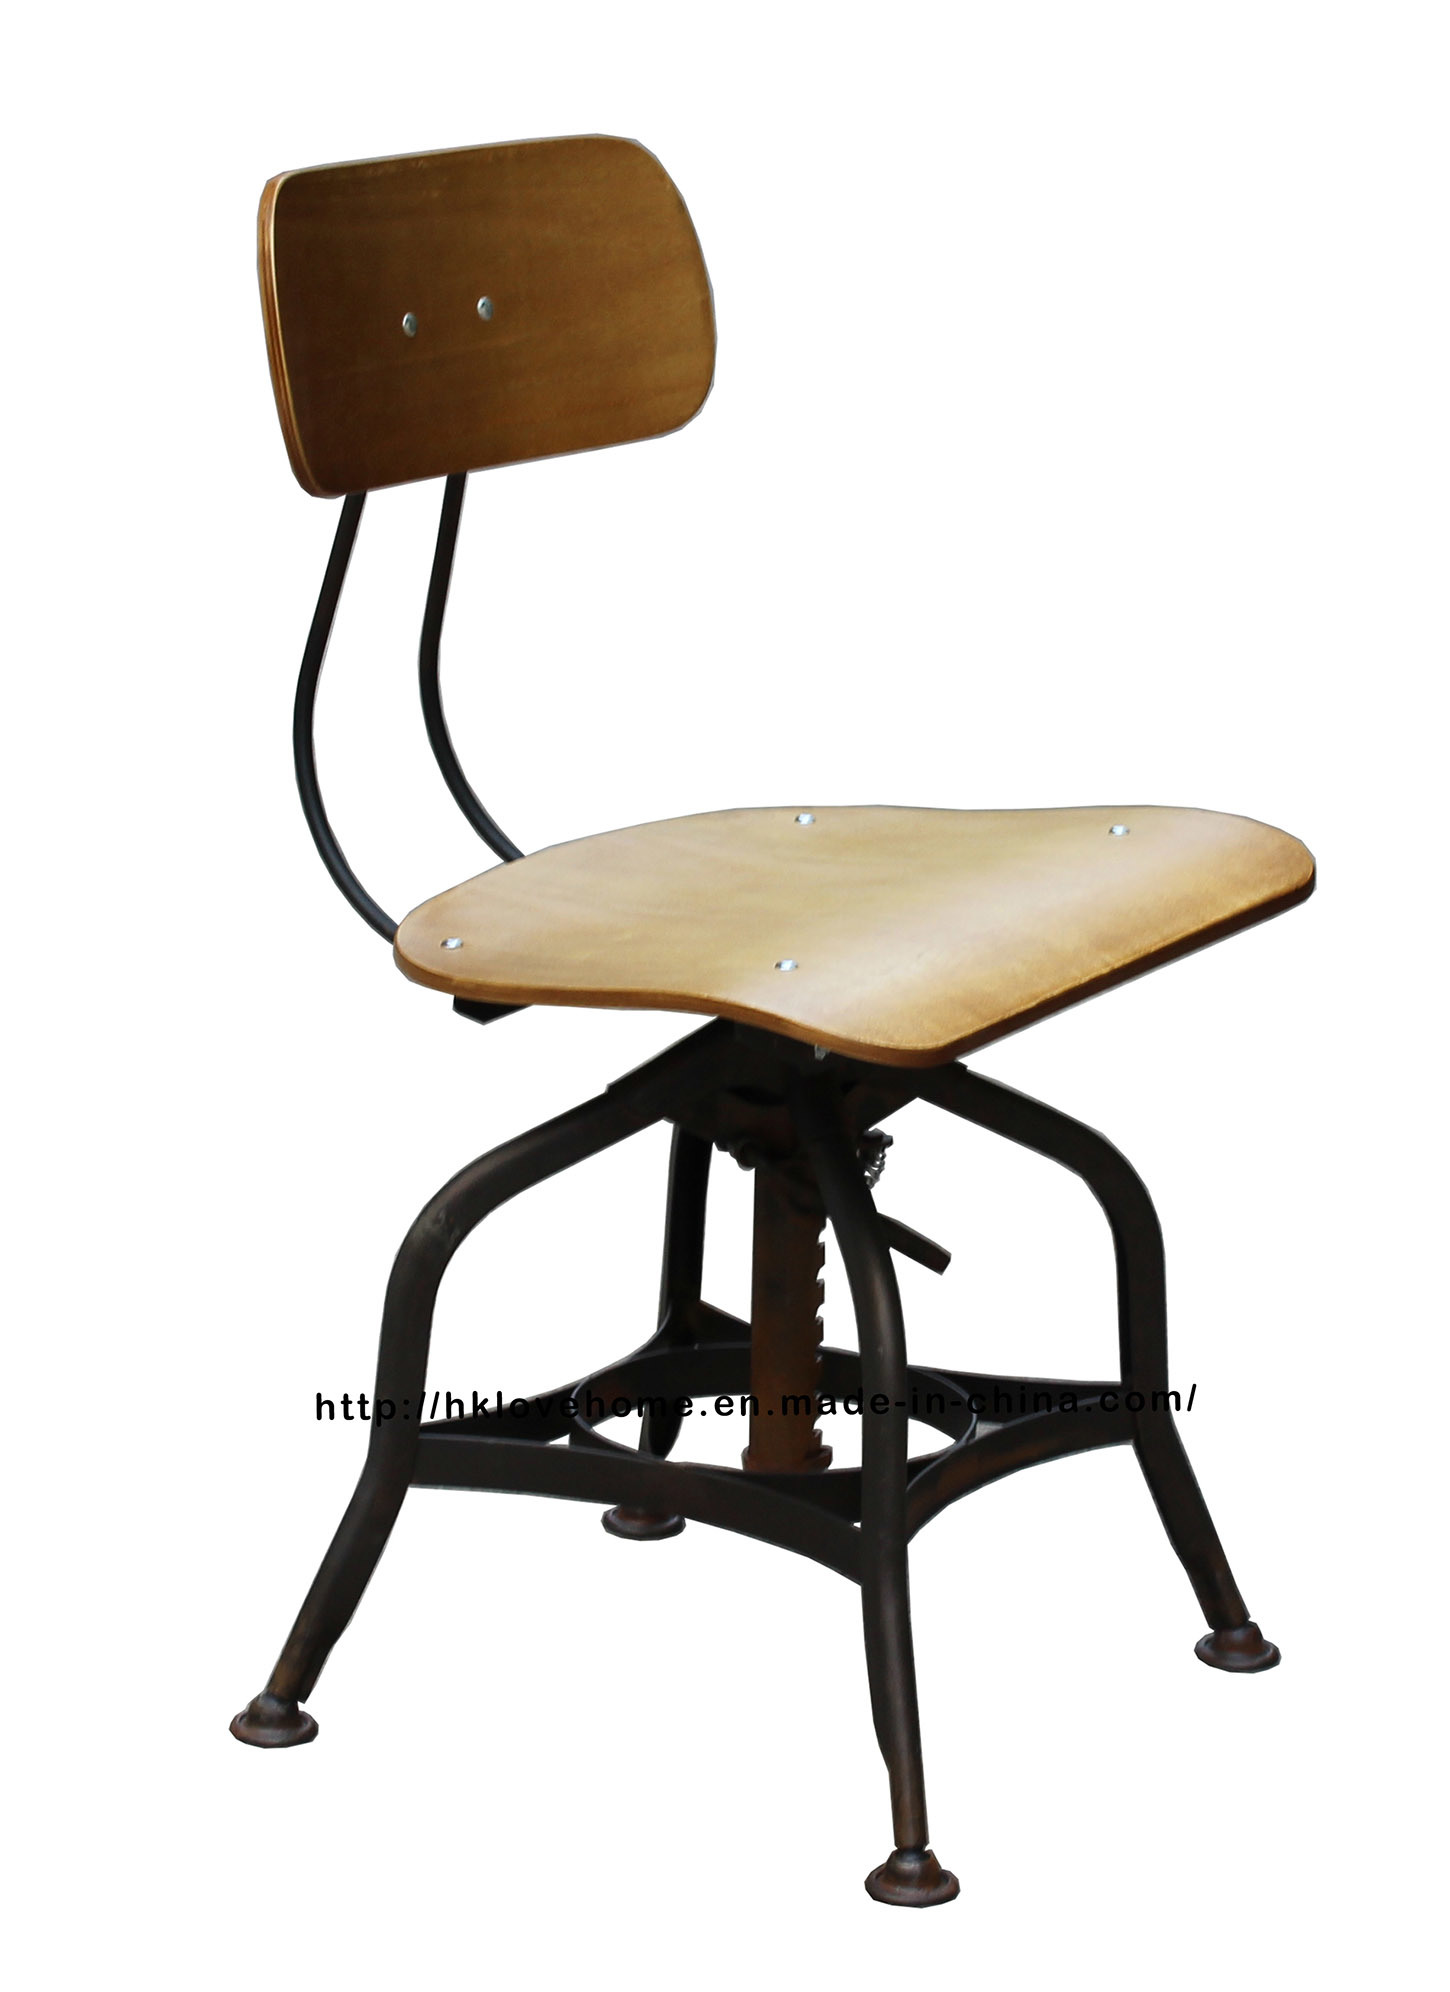 Replica Industrial Dining Vintage Toledo Wooden Chairs Barstools